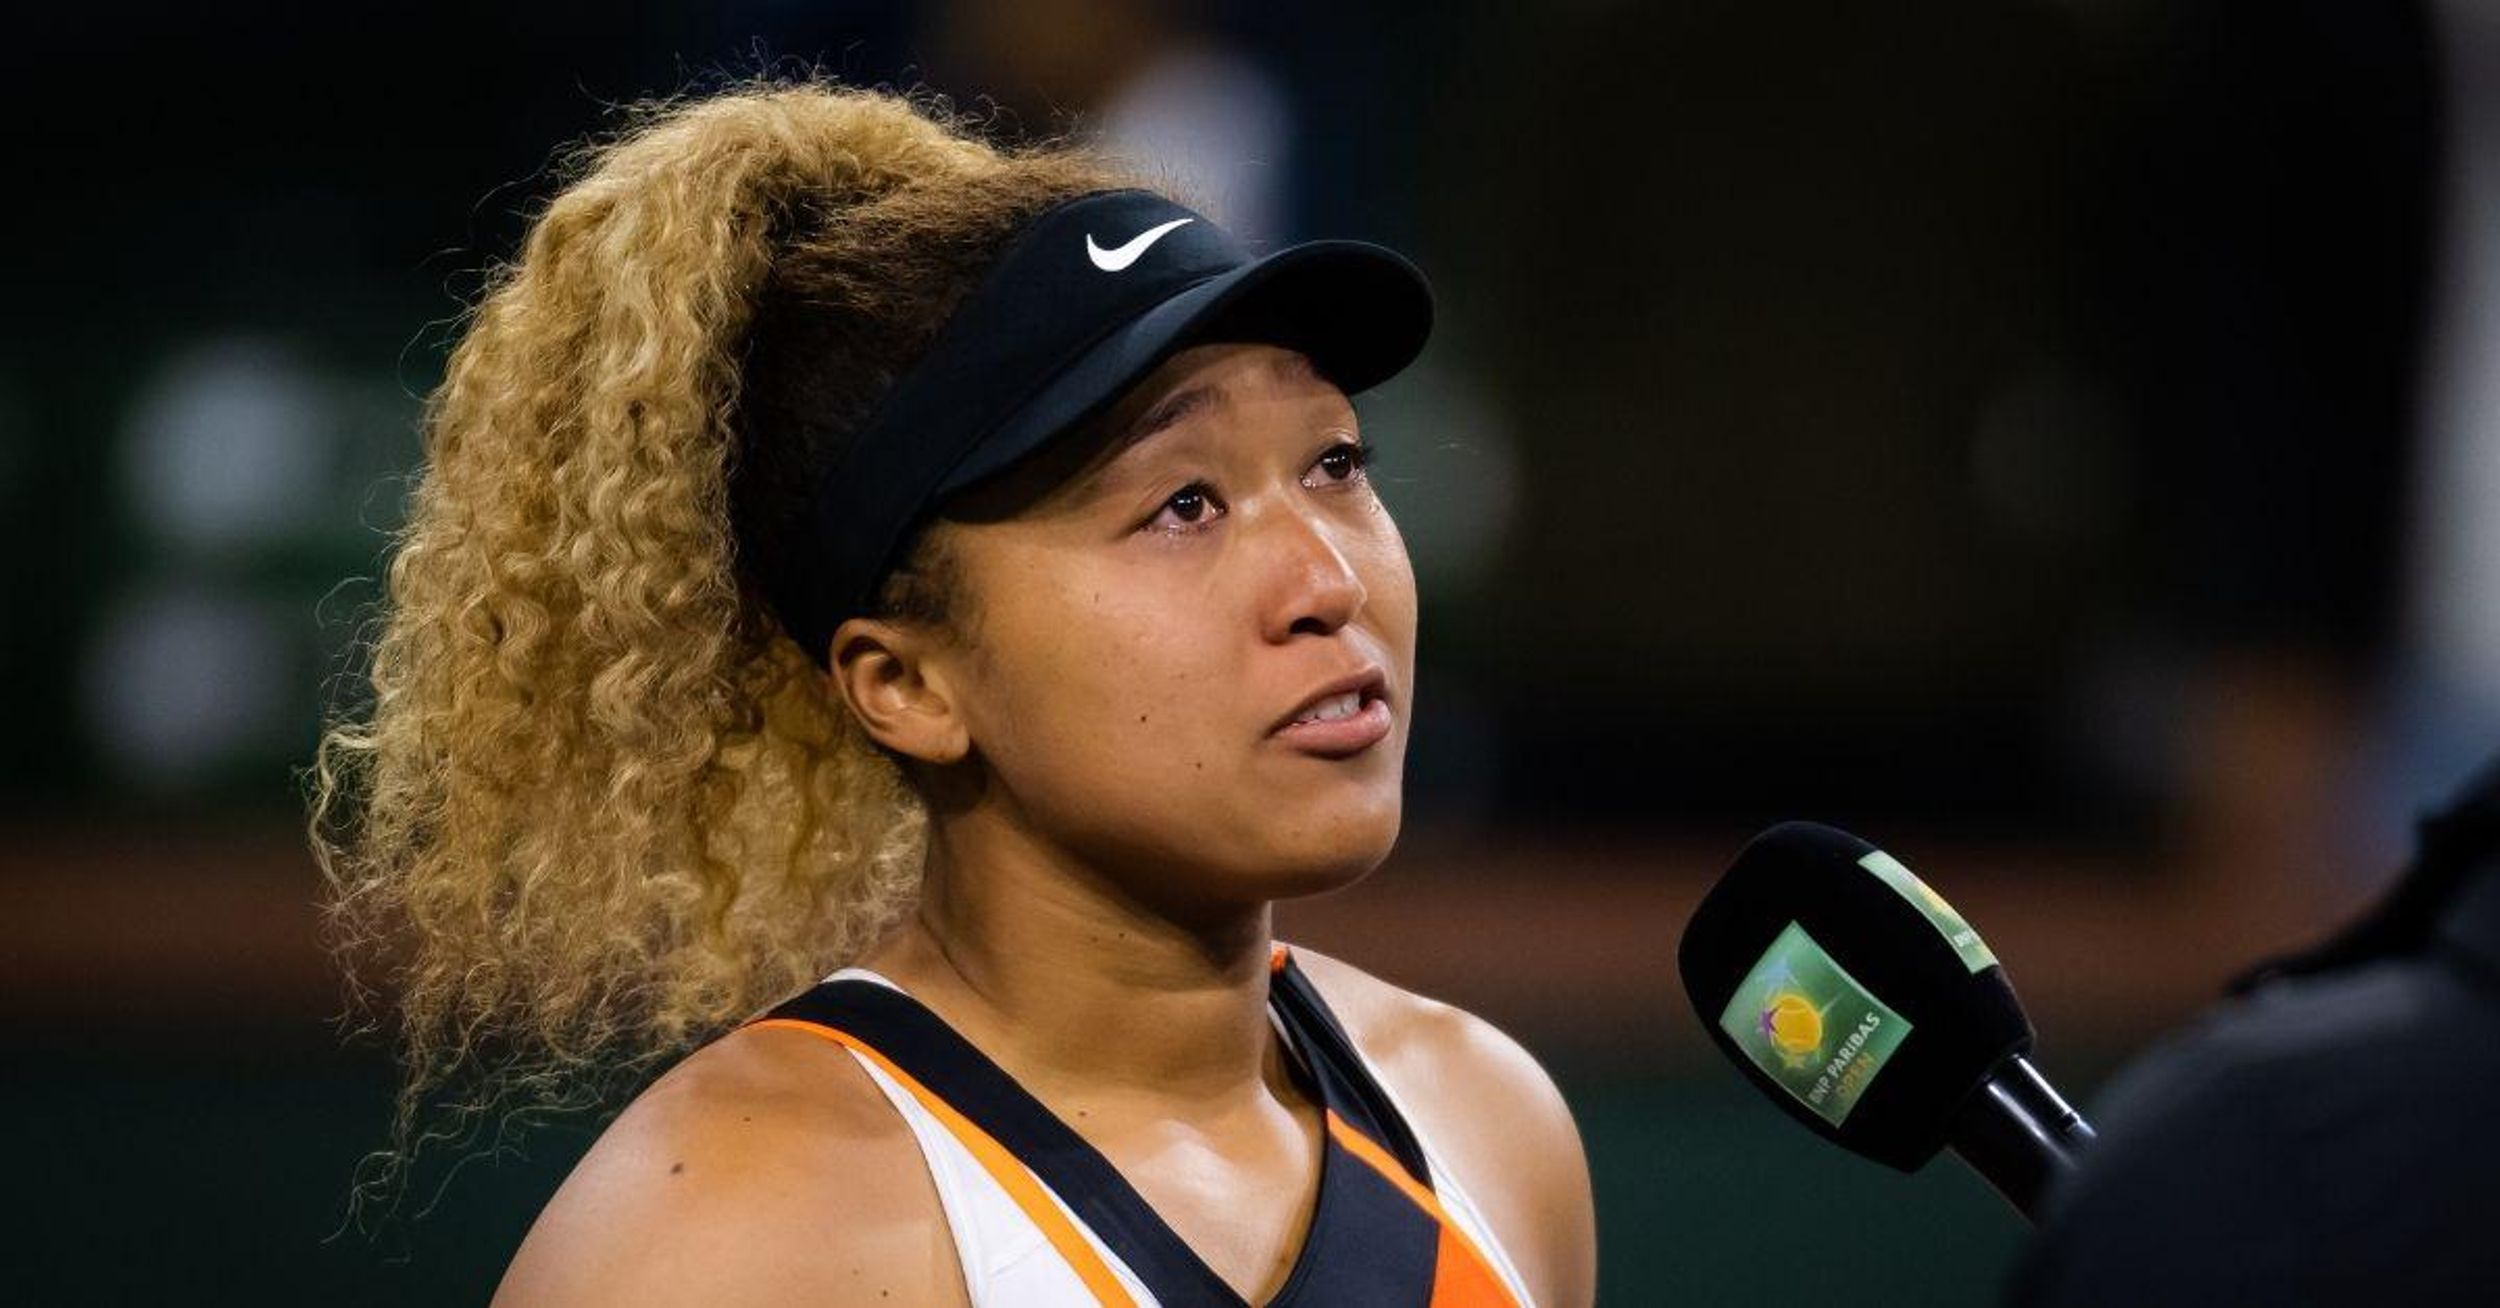 Naomi Osaka Tearfully Addresses Crowd After Being Cruelly Heckled At California Tennis Tournament